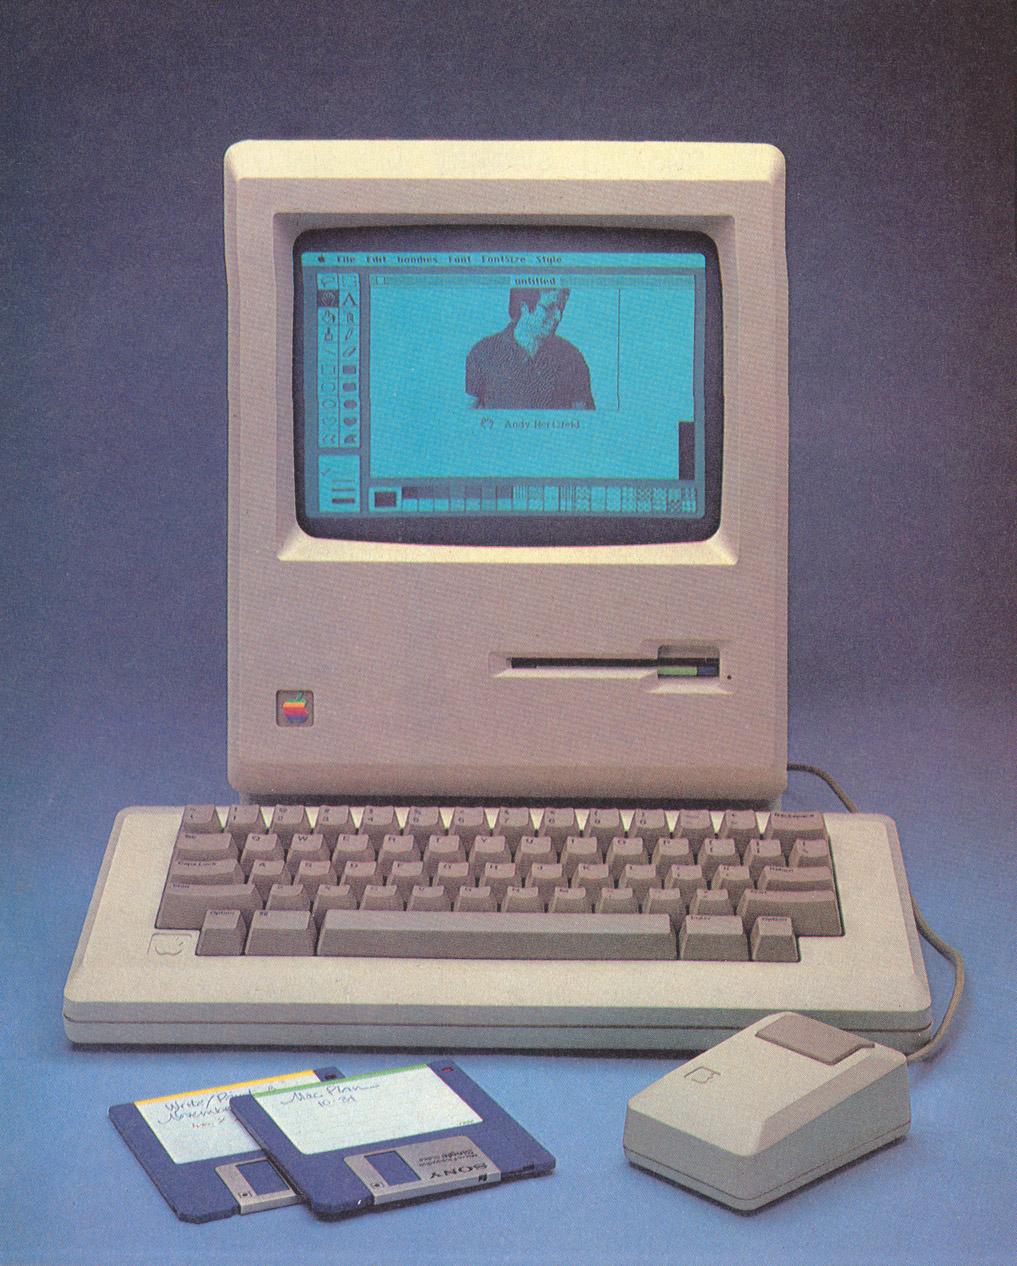 1984 Apple Macintosh Apple introduces the first successful consumer computer with a WIMP user interface (Windows Icons